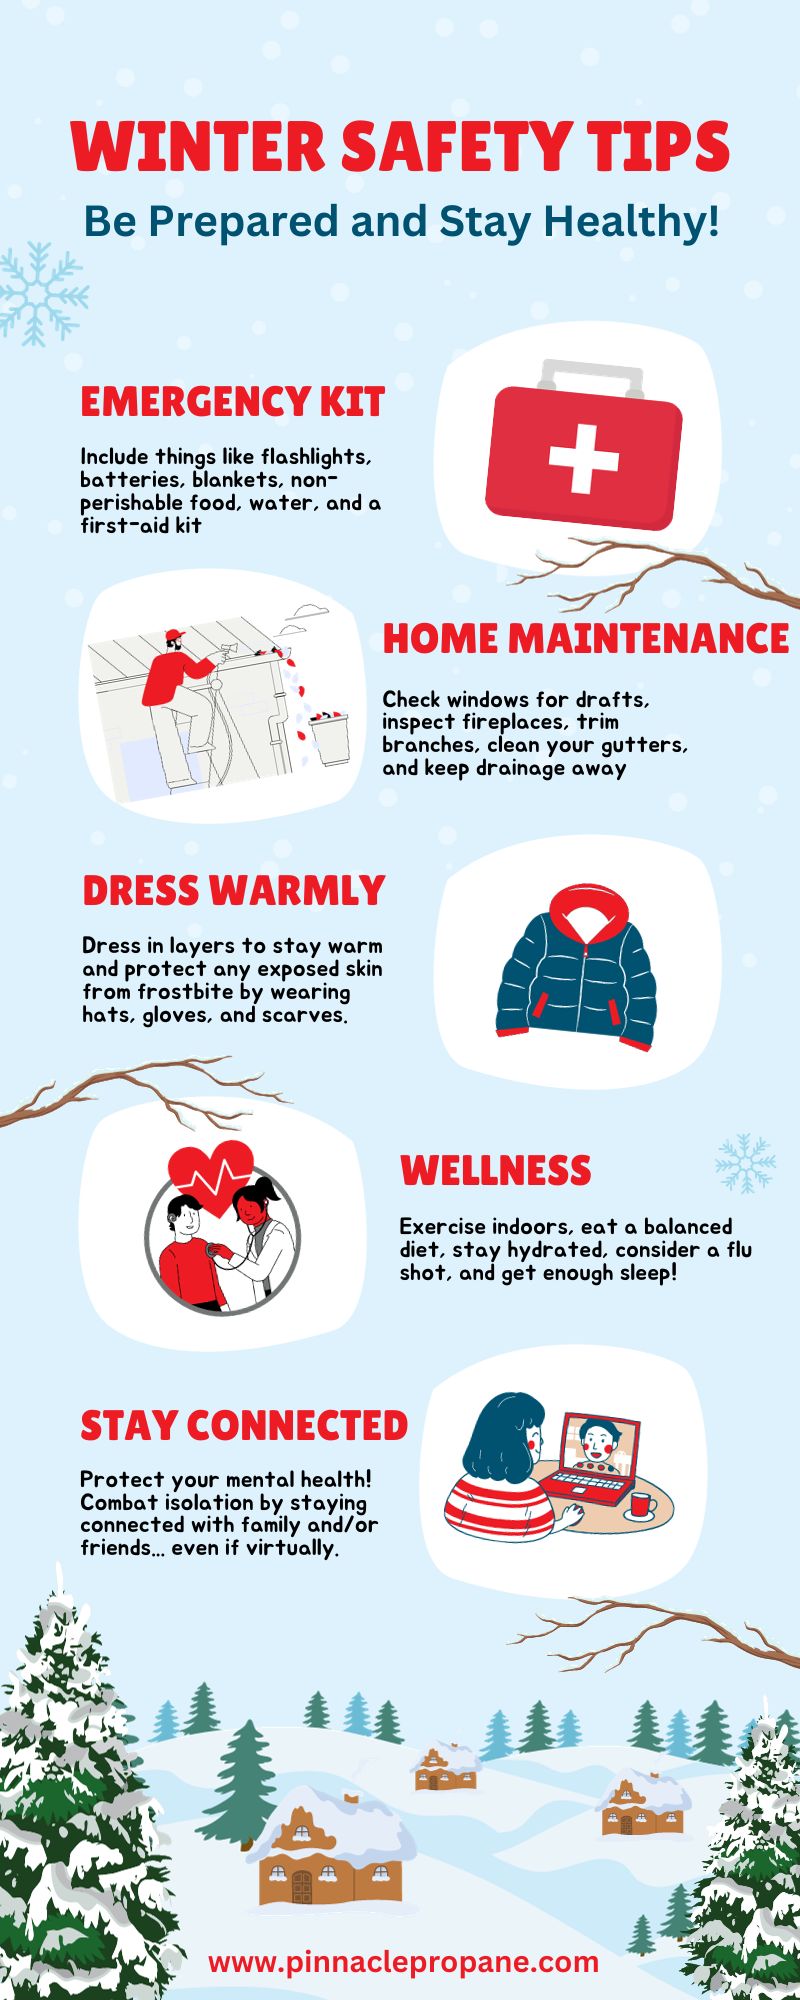 Winter safety tips infographic